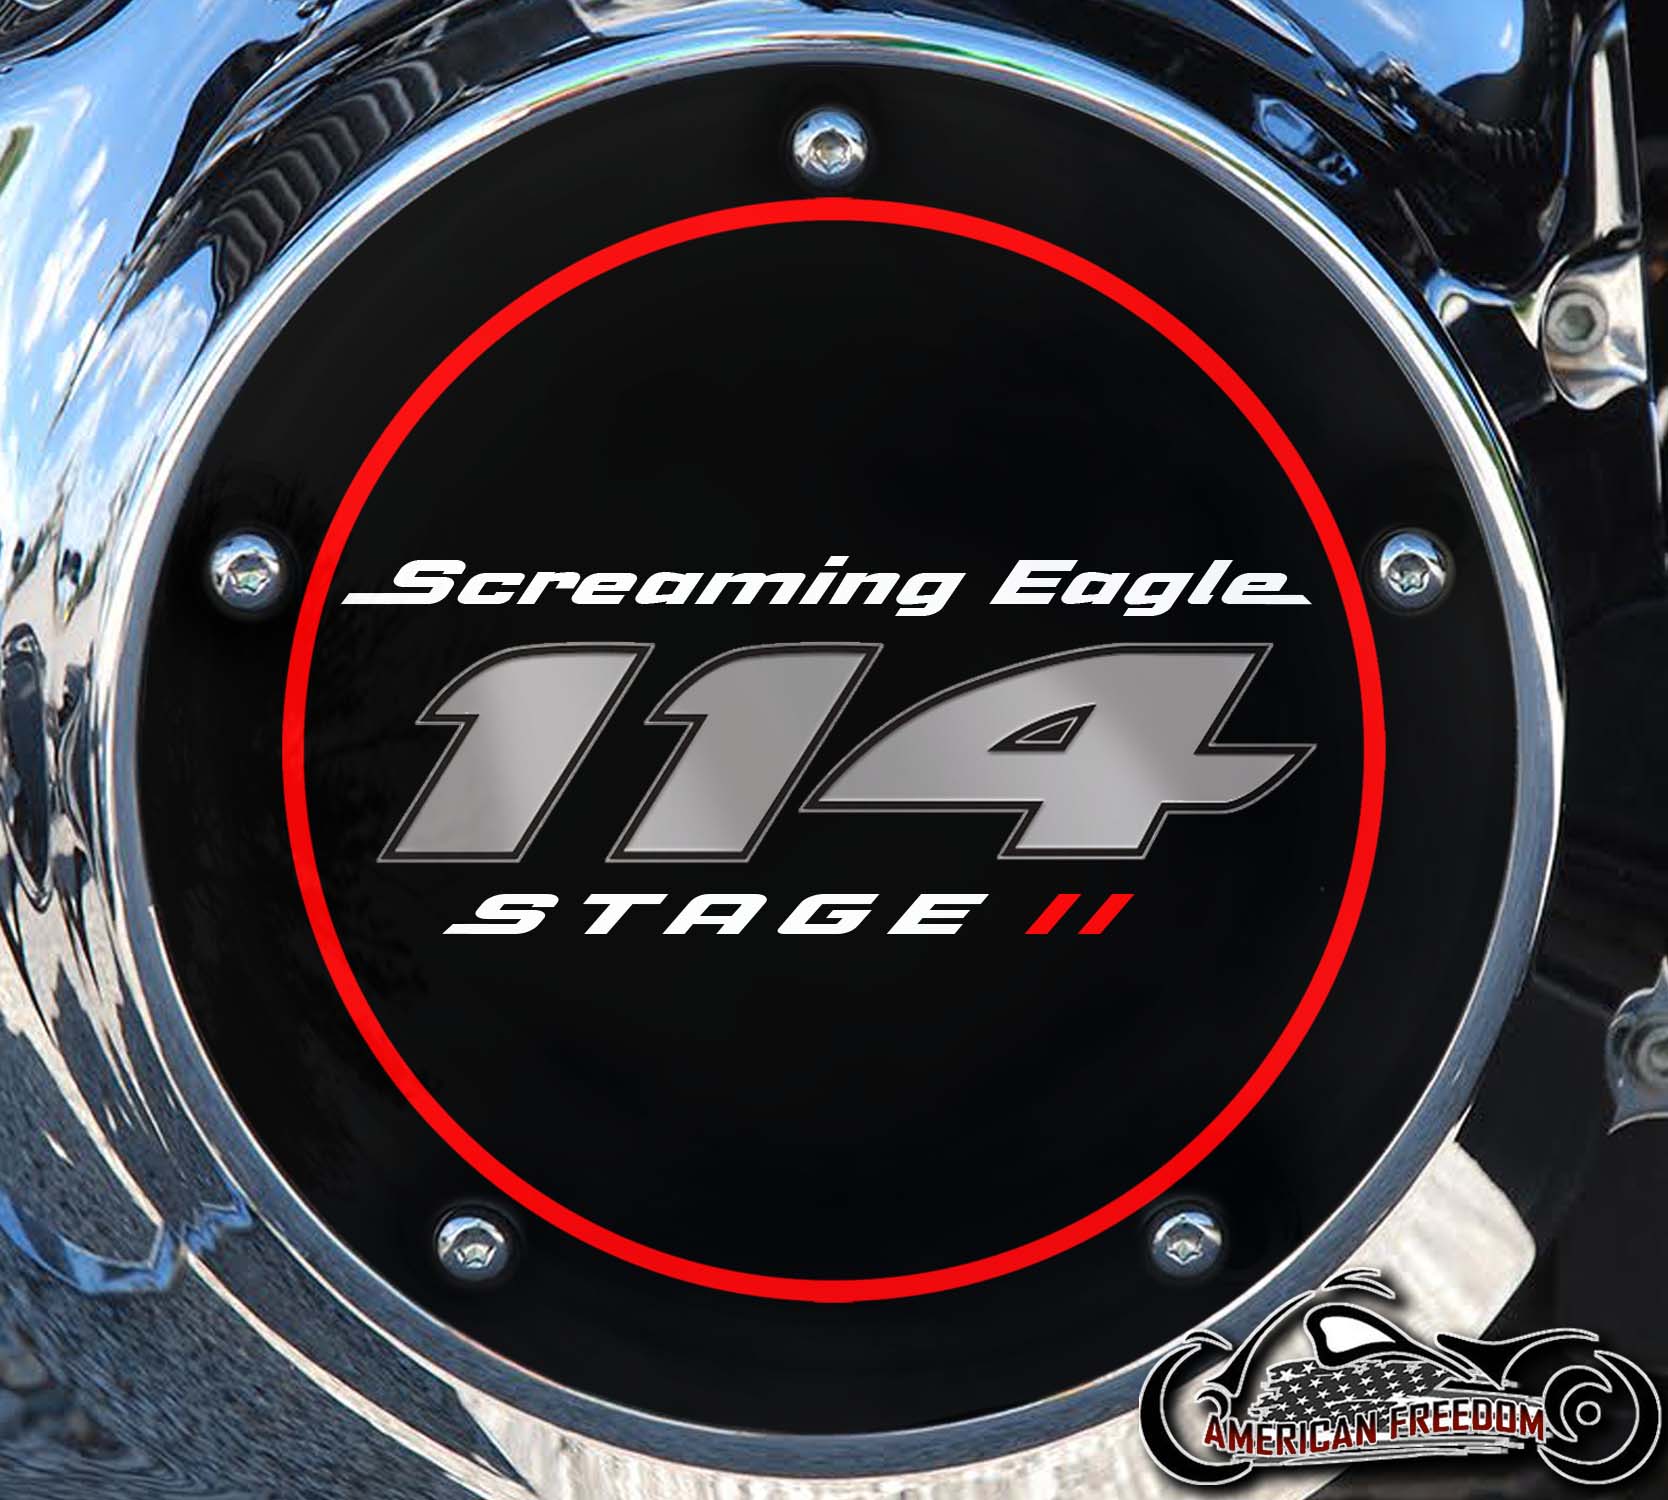 Screaming Eagle Stage II 114 DERBY COVER OL